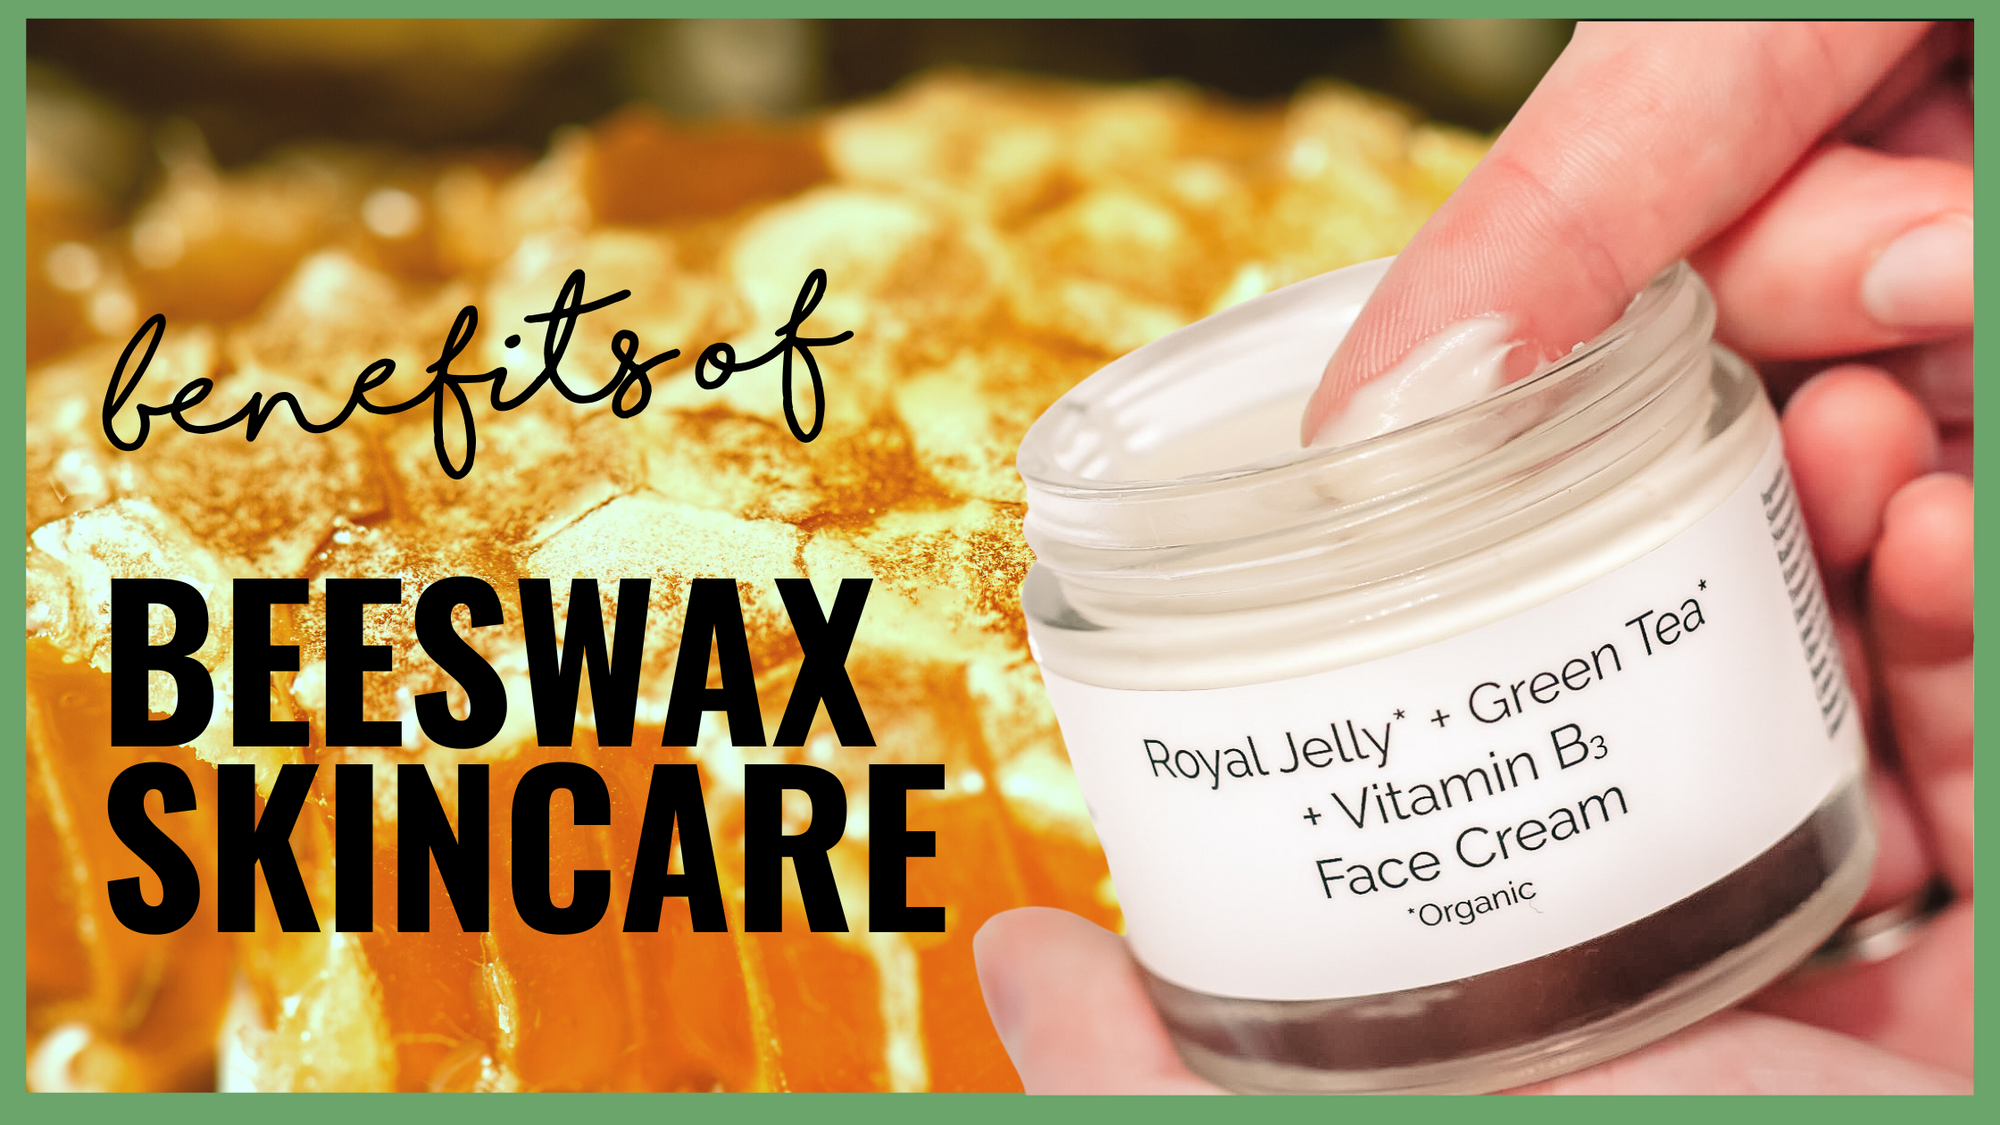 Benefits of beeswax in skincare